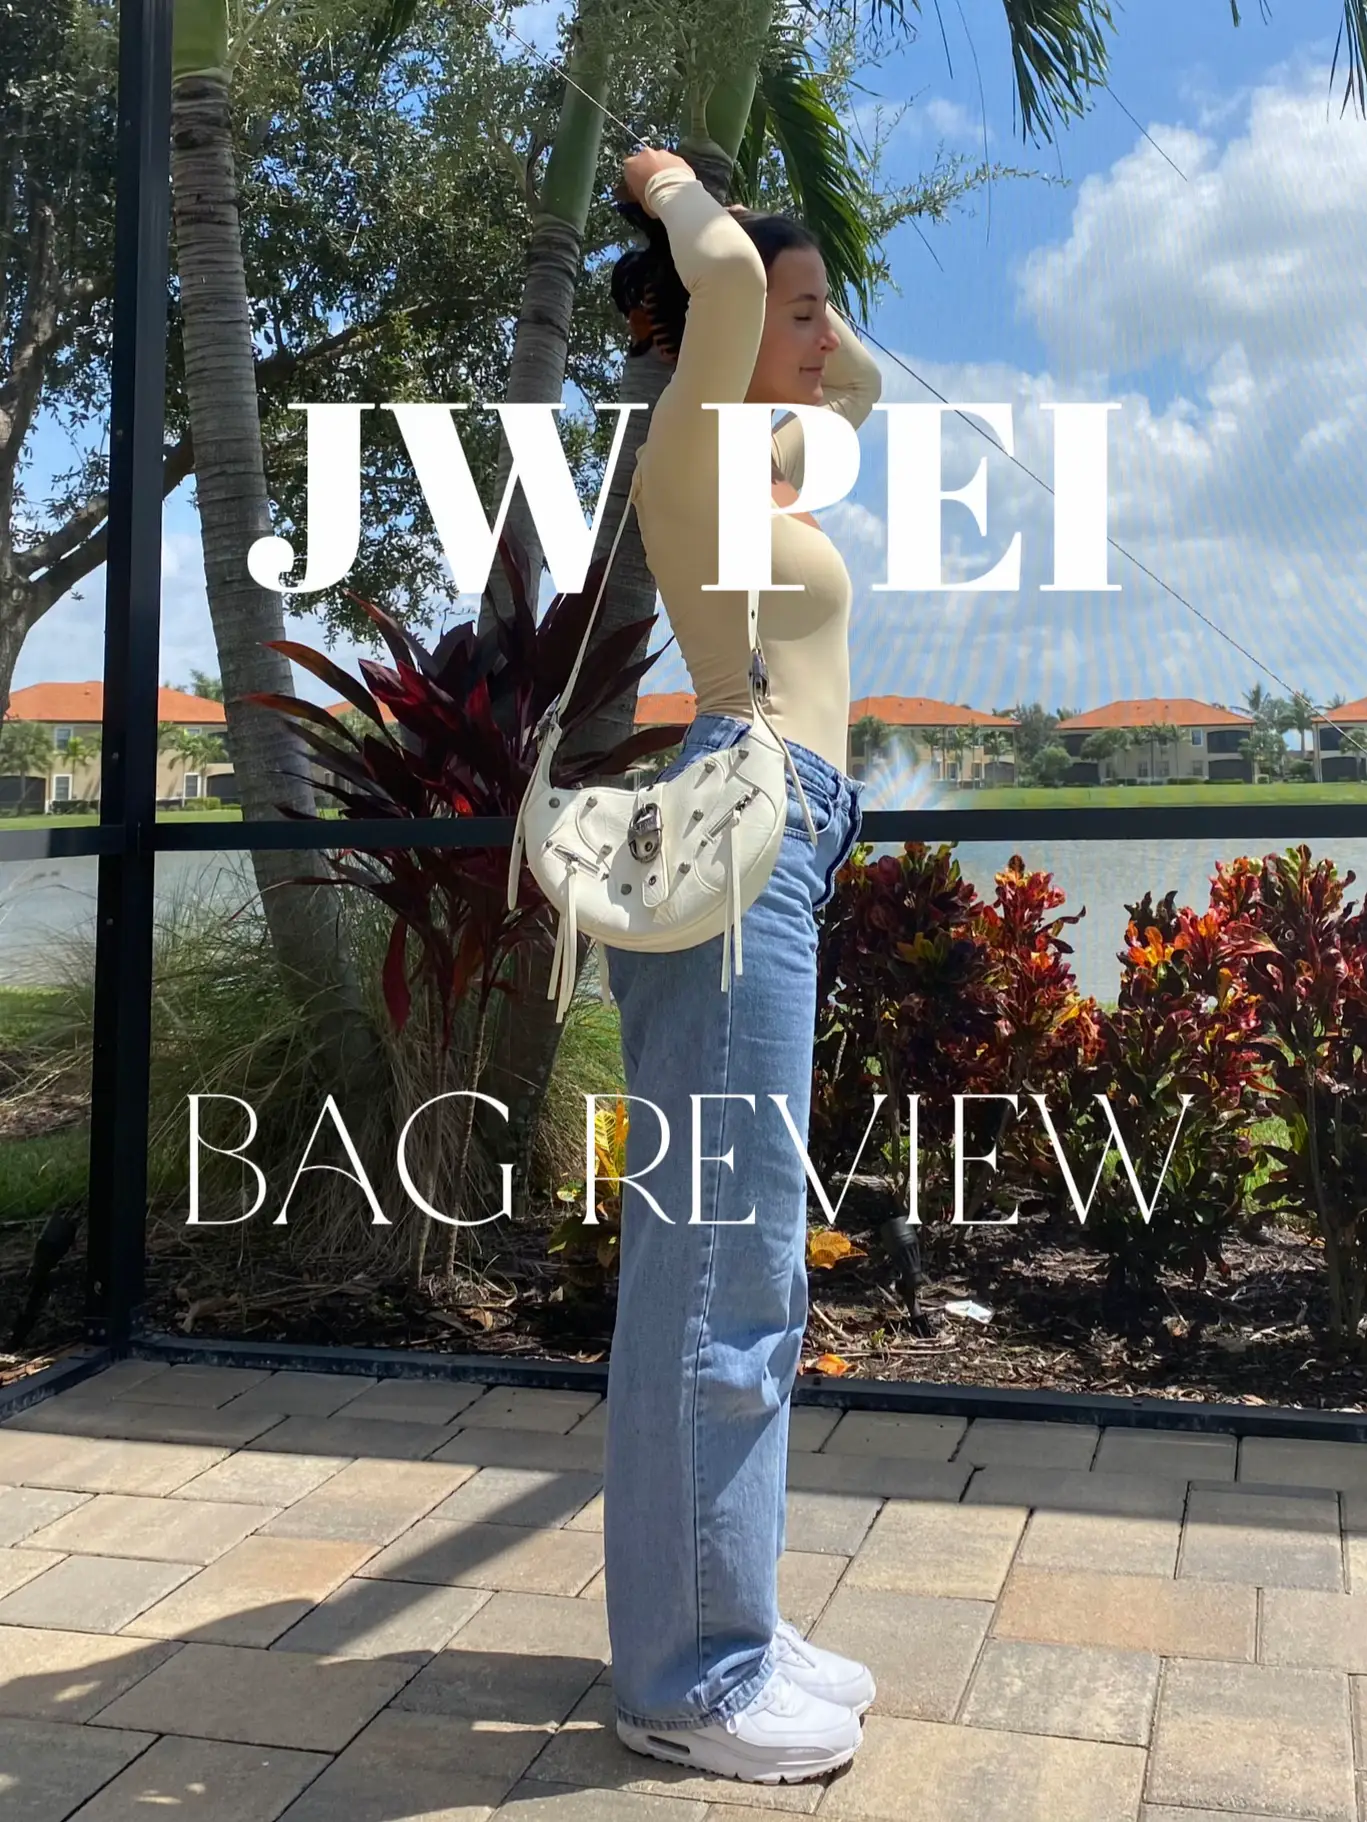 JW PEI unboxing and review  Are these bags worth the hype? 